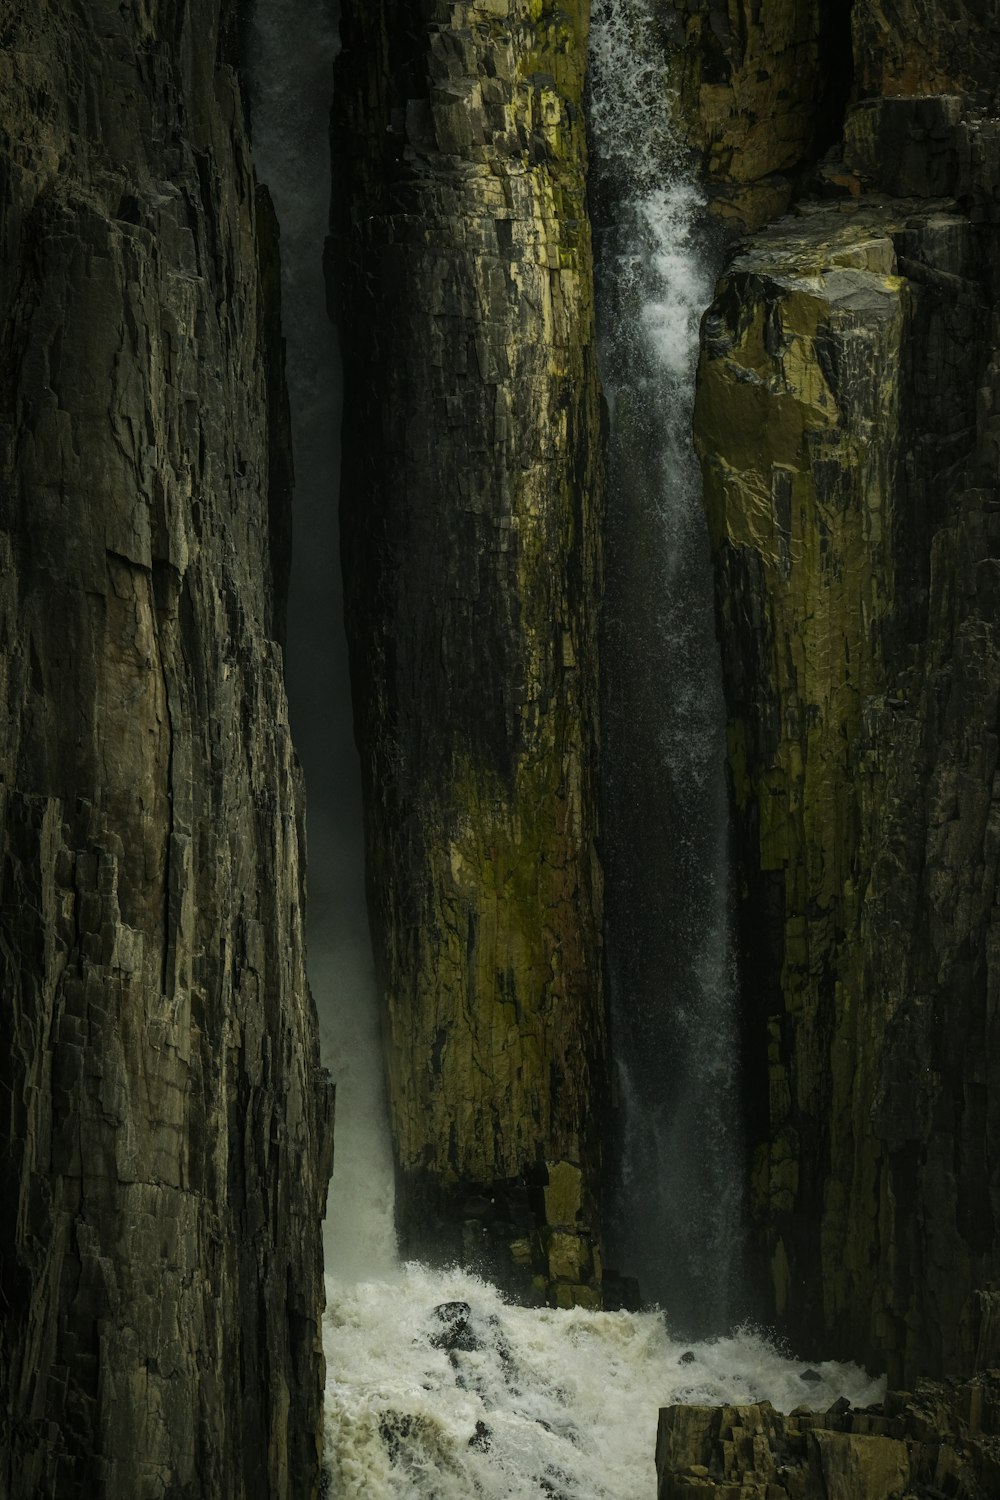 a waterfall is coming out of the rocks into the water